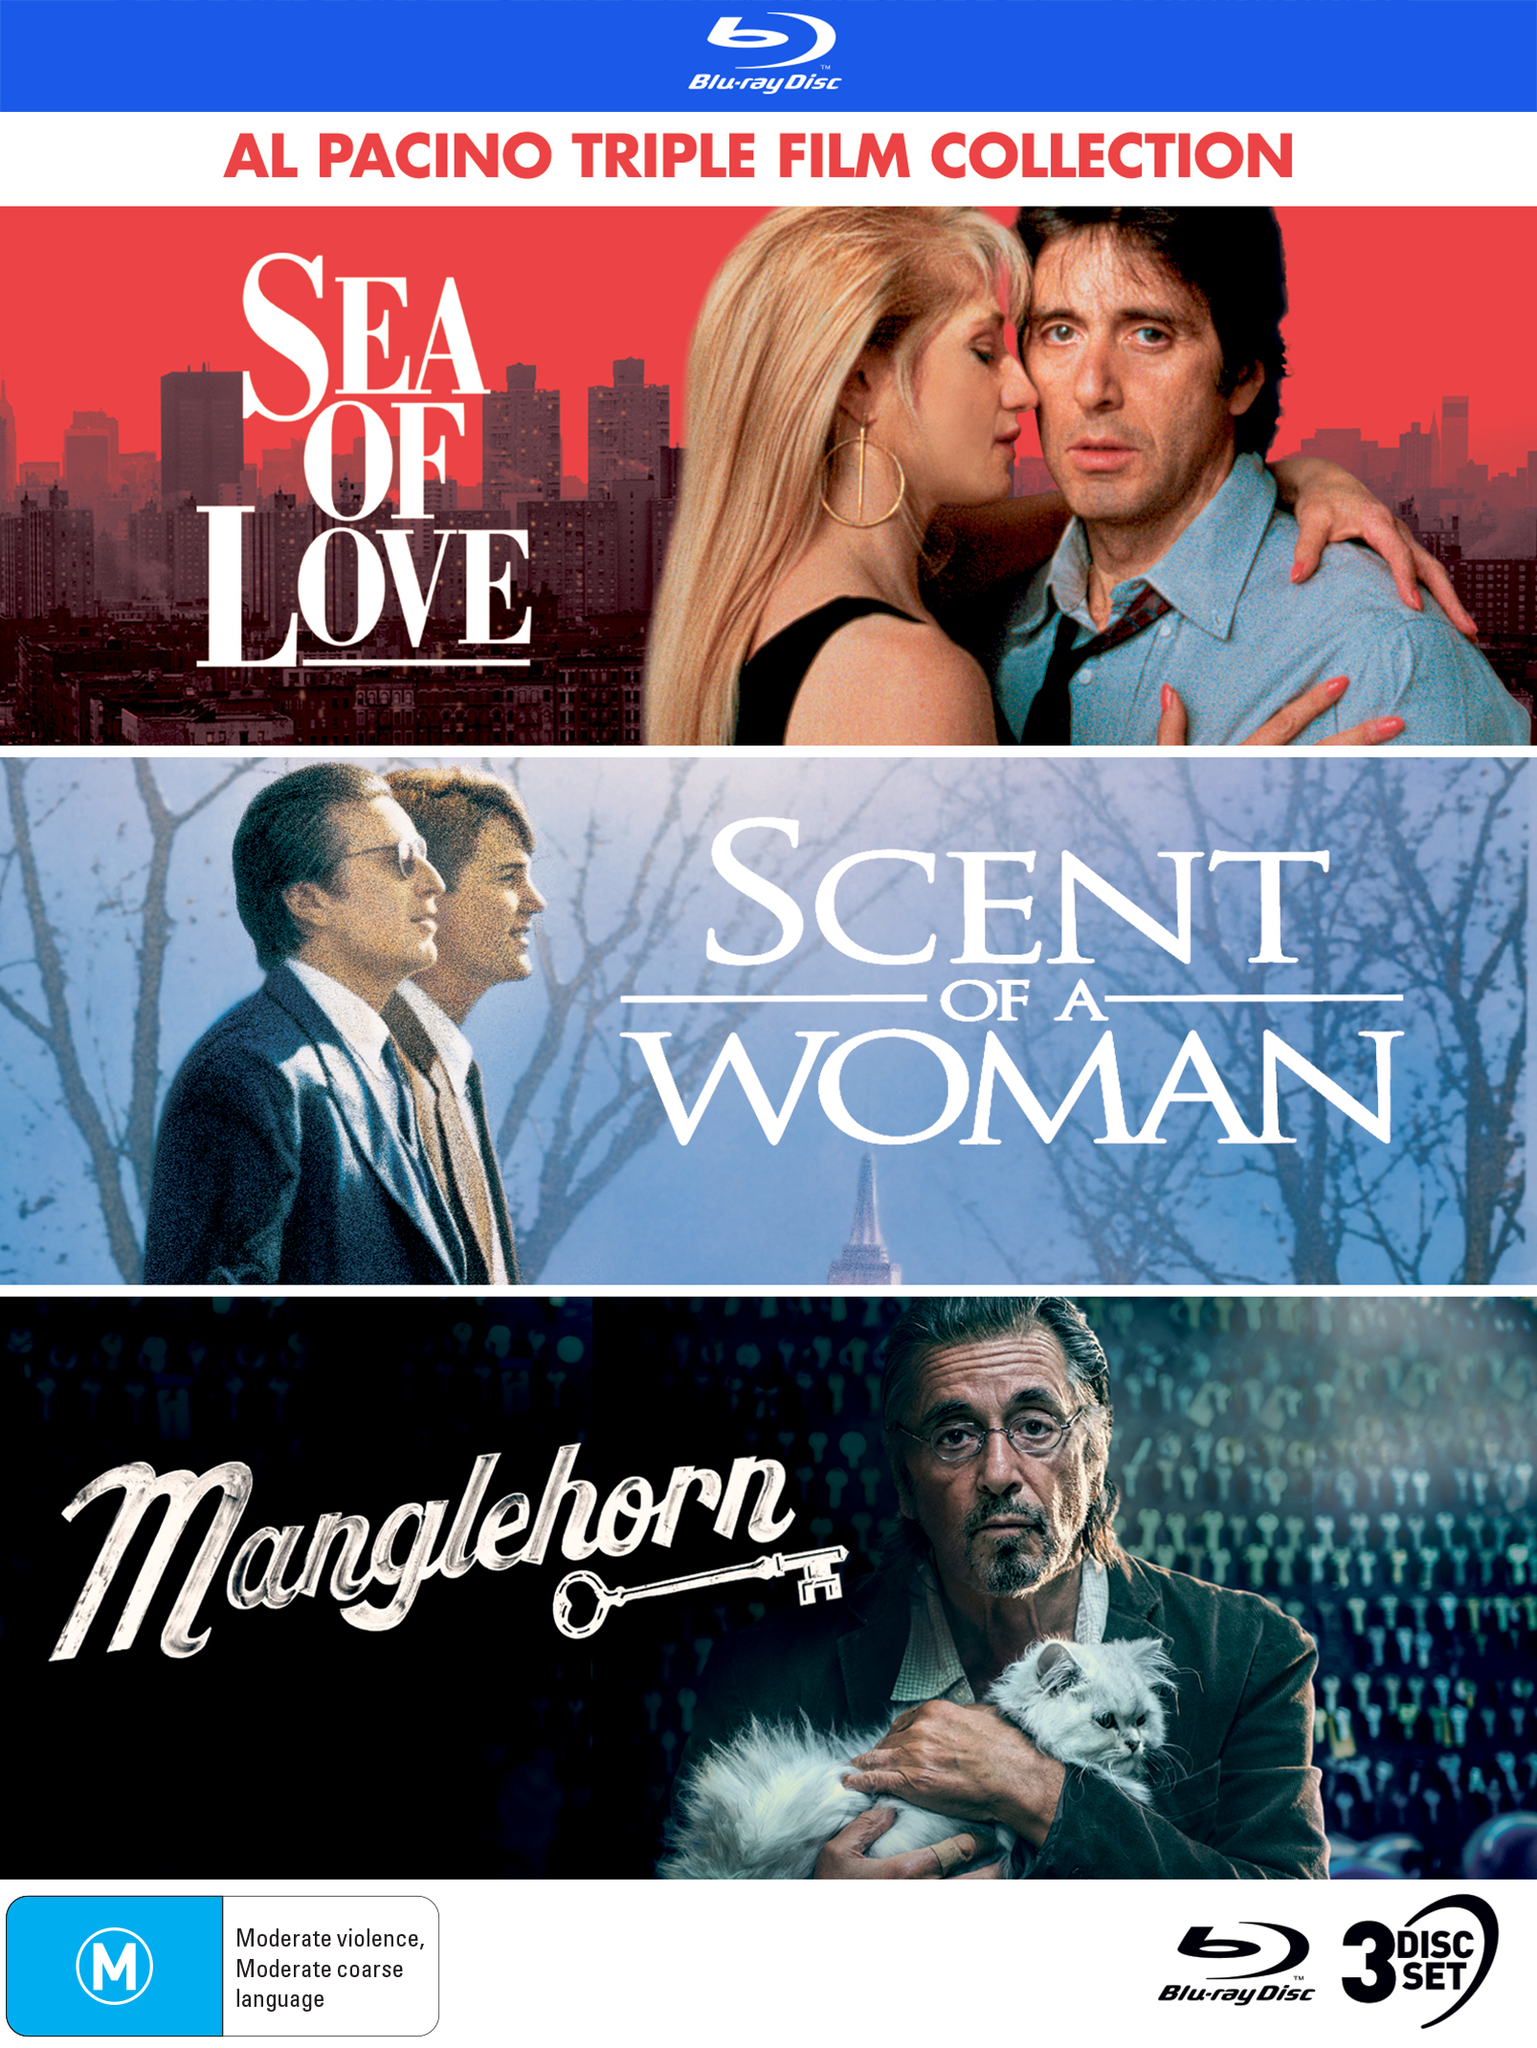 AL PACINO: TRIPLE FILM COLLECTION (SEA OF LOVE / SCENT OF A WOMAN / MANGLEHORN) - SPECIAL EDITION BLU-RAY